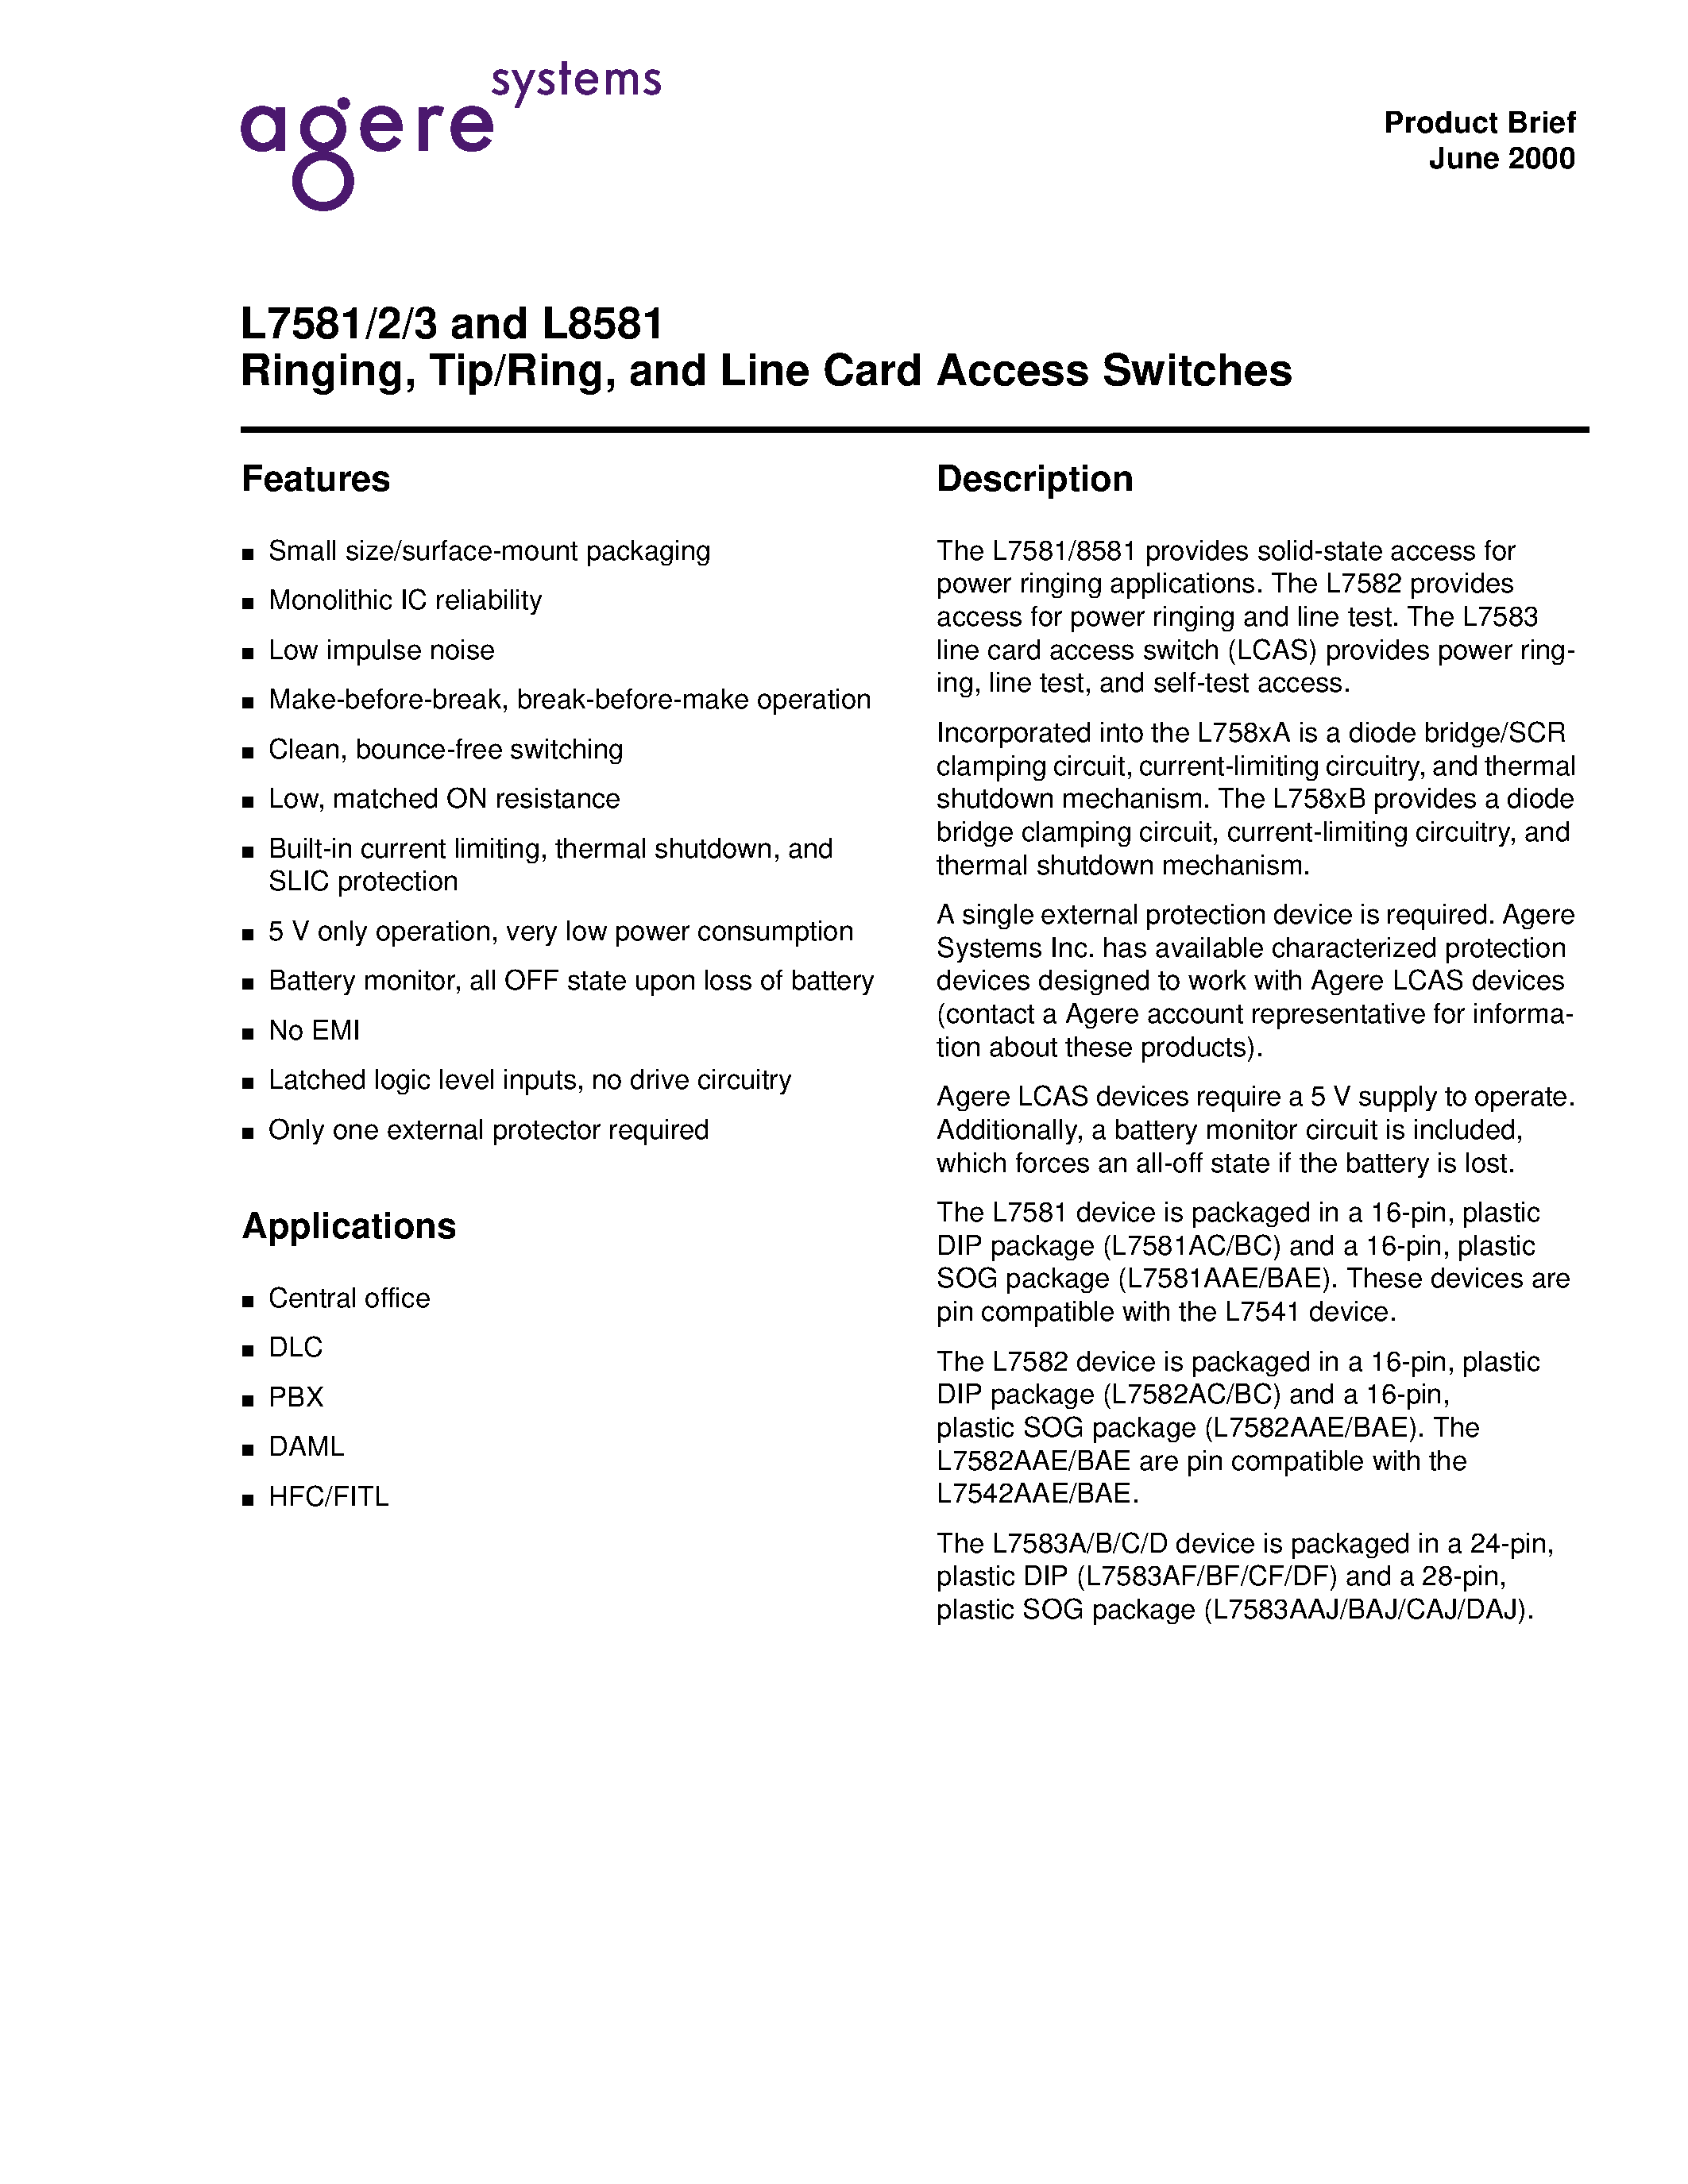 Даташит L7582 - Ringing / Tip/Ring and Line Card Access Switches страница 1